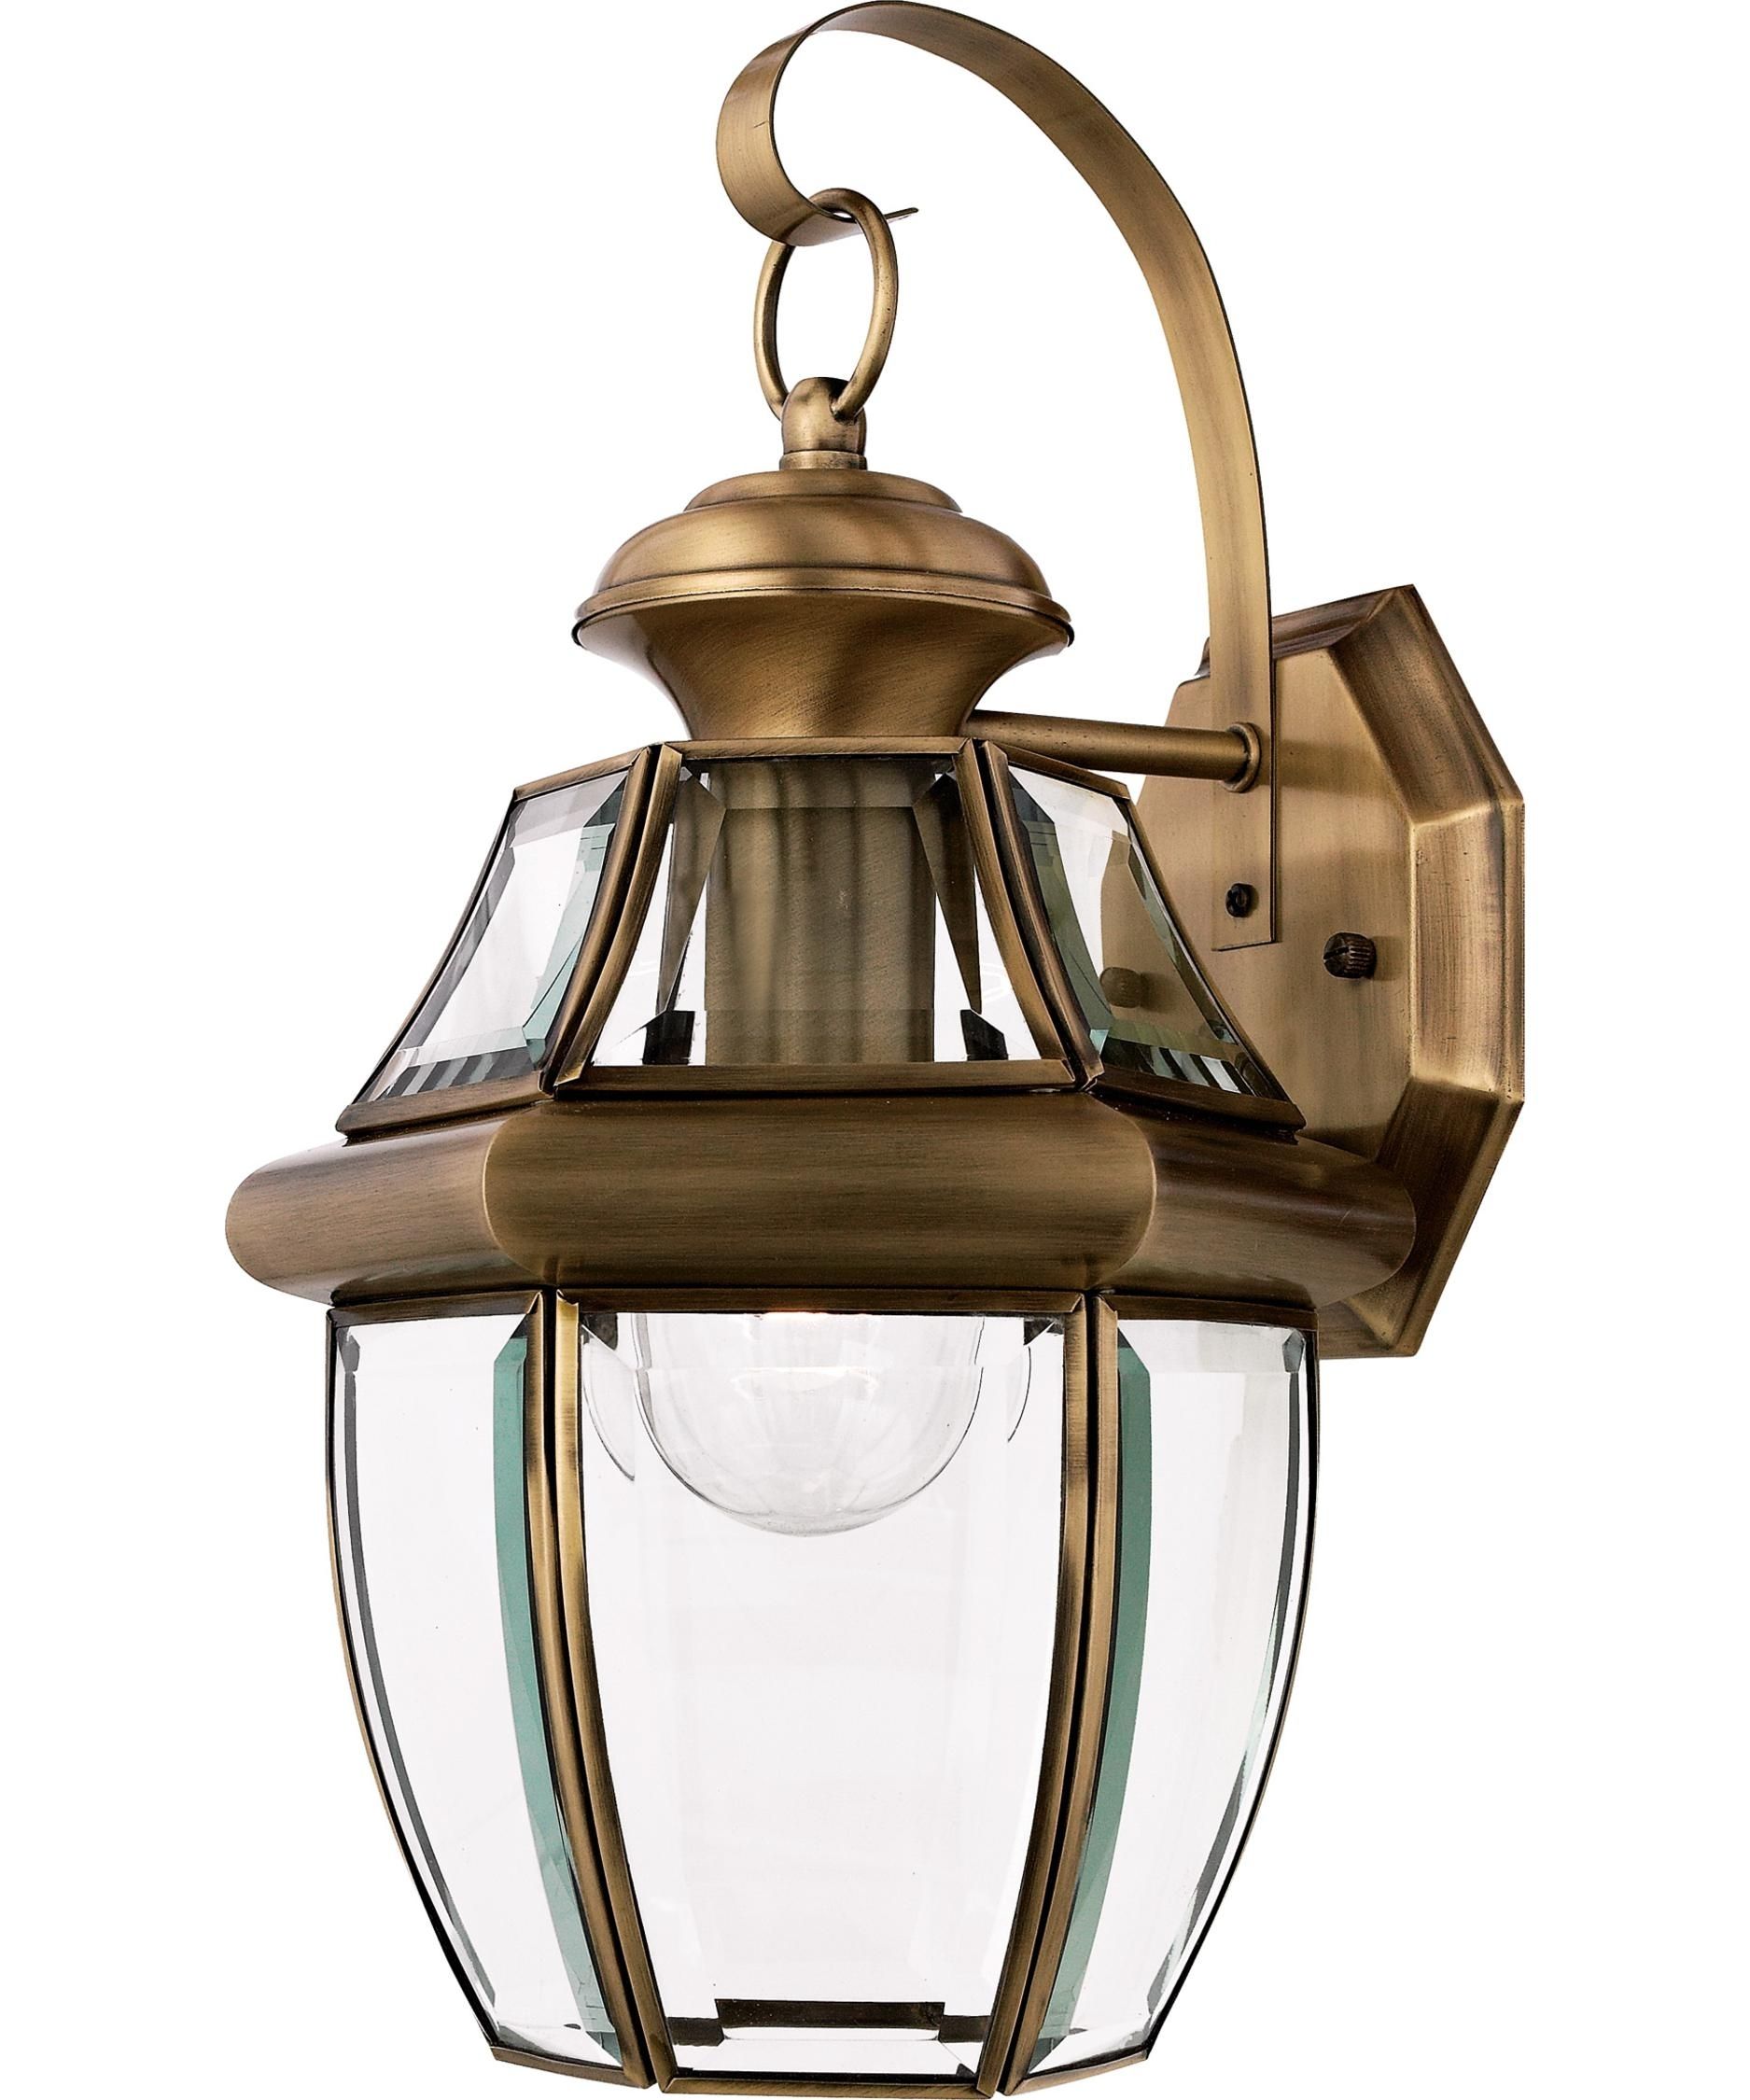 Quoizel Ny8316 Newbury 9 Inch Wide 1 Light Outdoor Wall Light Inside Outdoor Wall Lantern Lighting (View 5 of 15)